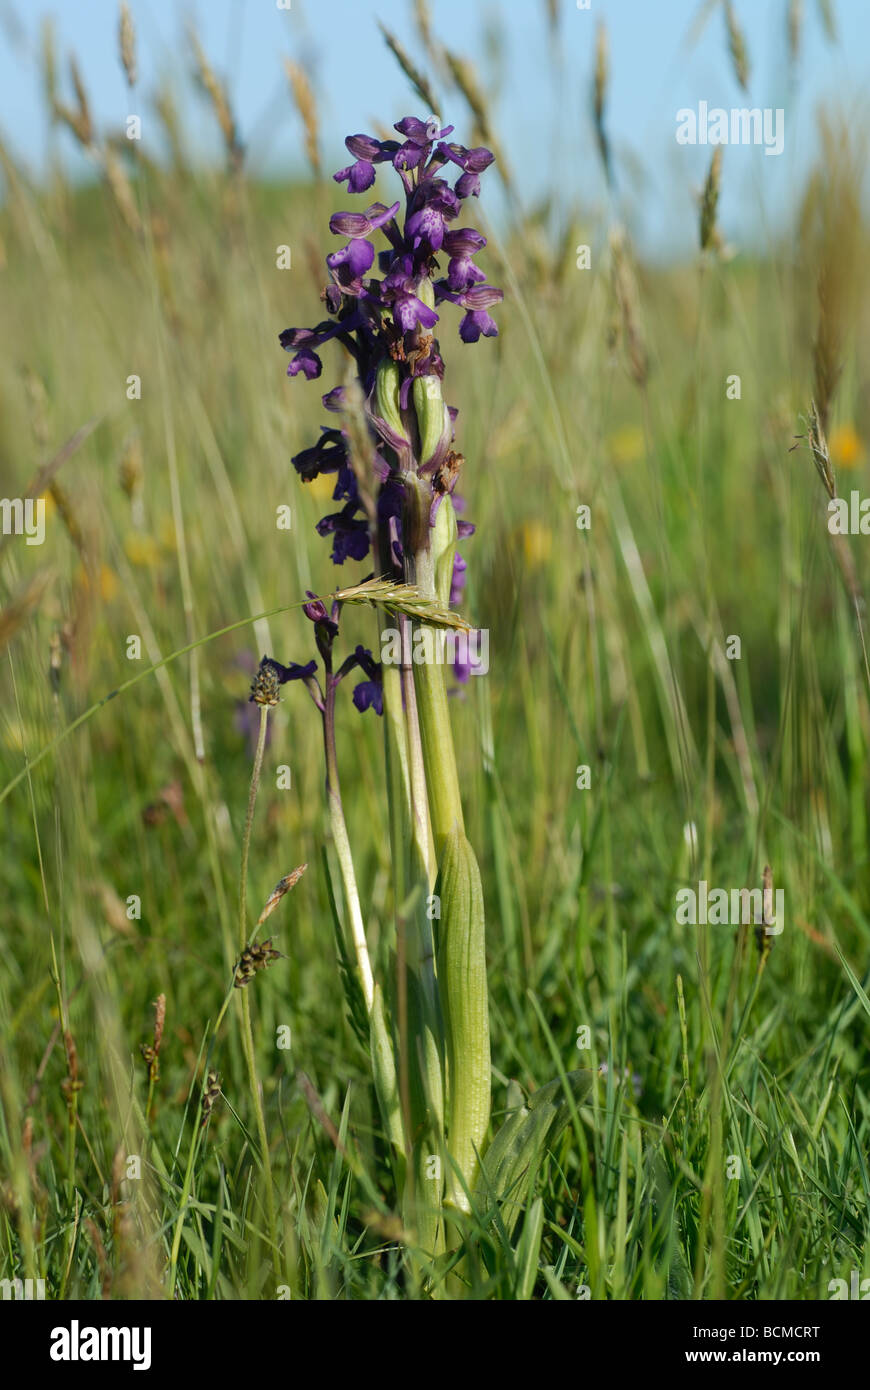 Green-winged Orchid / Green-veined Orchid (Anacamptis Morio) Stockfoto